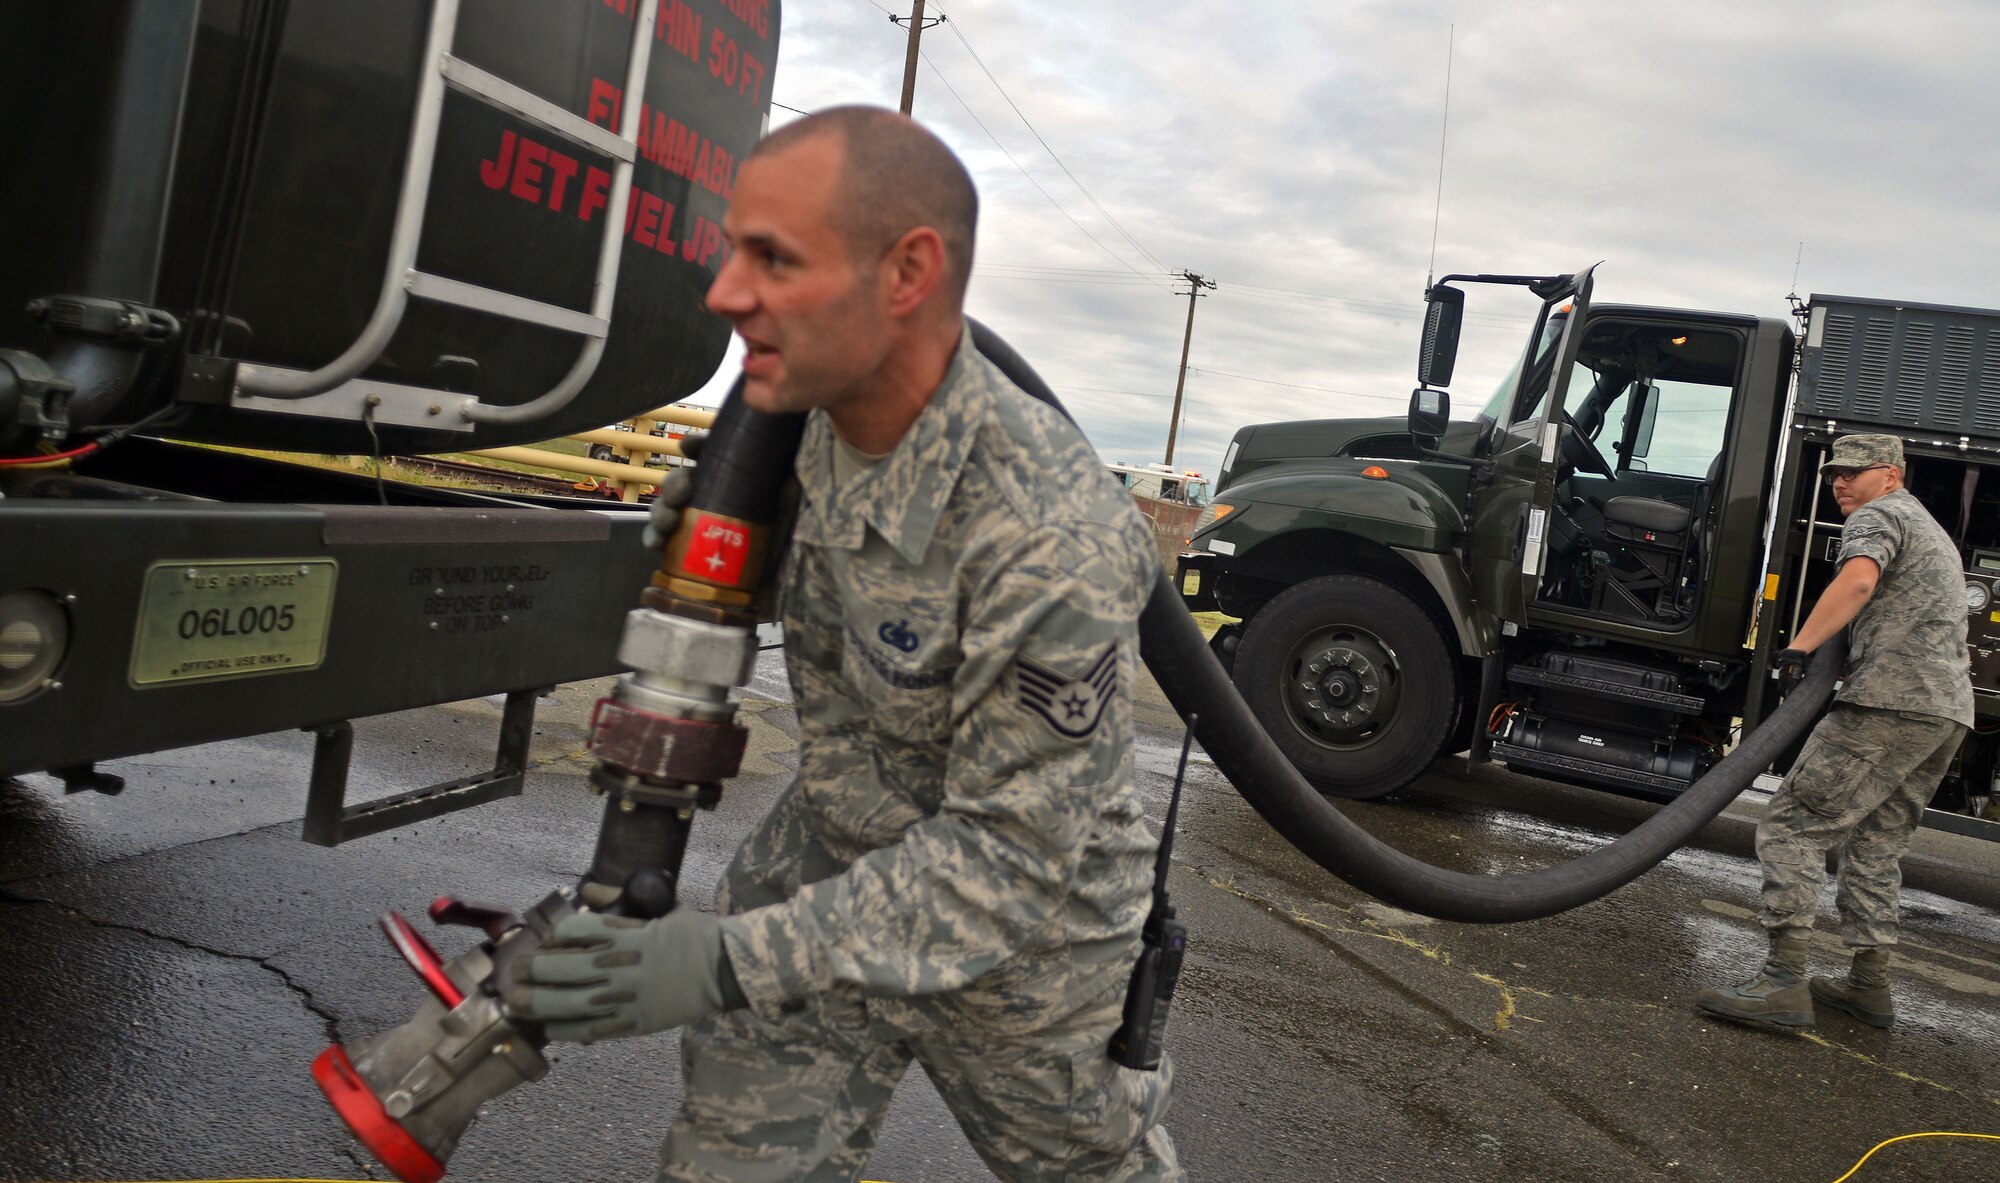 Staff Sgt. Christopher Pragoff and Airman 1st Class Trevor Story, 9th Logistics Readiness Squadron fuels distribution operators, work to contain a simulated JPTS fuel spill on Beale Air Force Base, Calif., March 28, 2013. The exercise demonstrated the response efforts of Team Beale personnel. (U.S. Air Force photo by Airman 1st Class Drew Buchanan/Released)